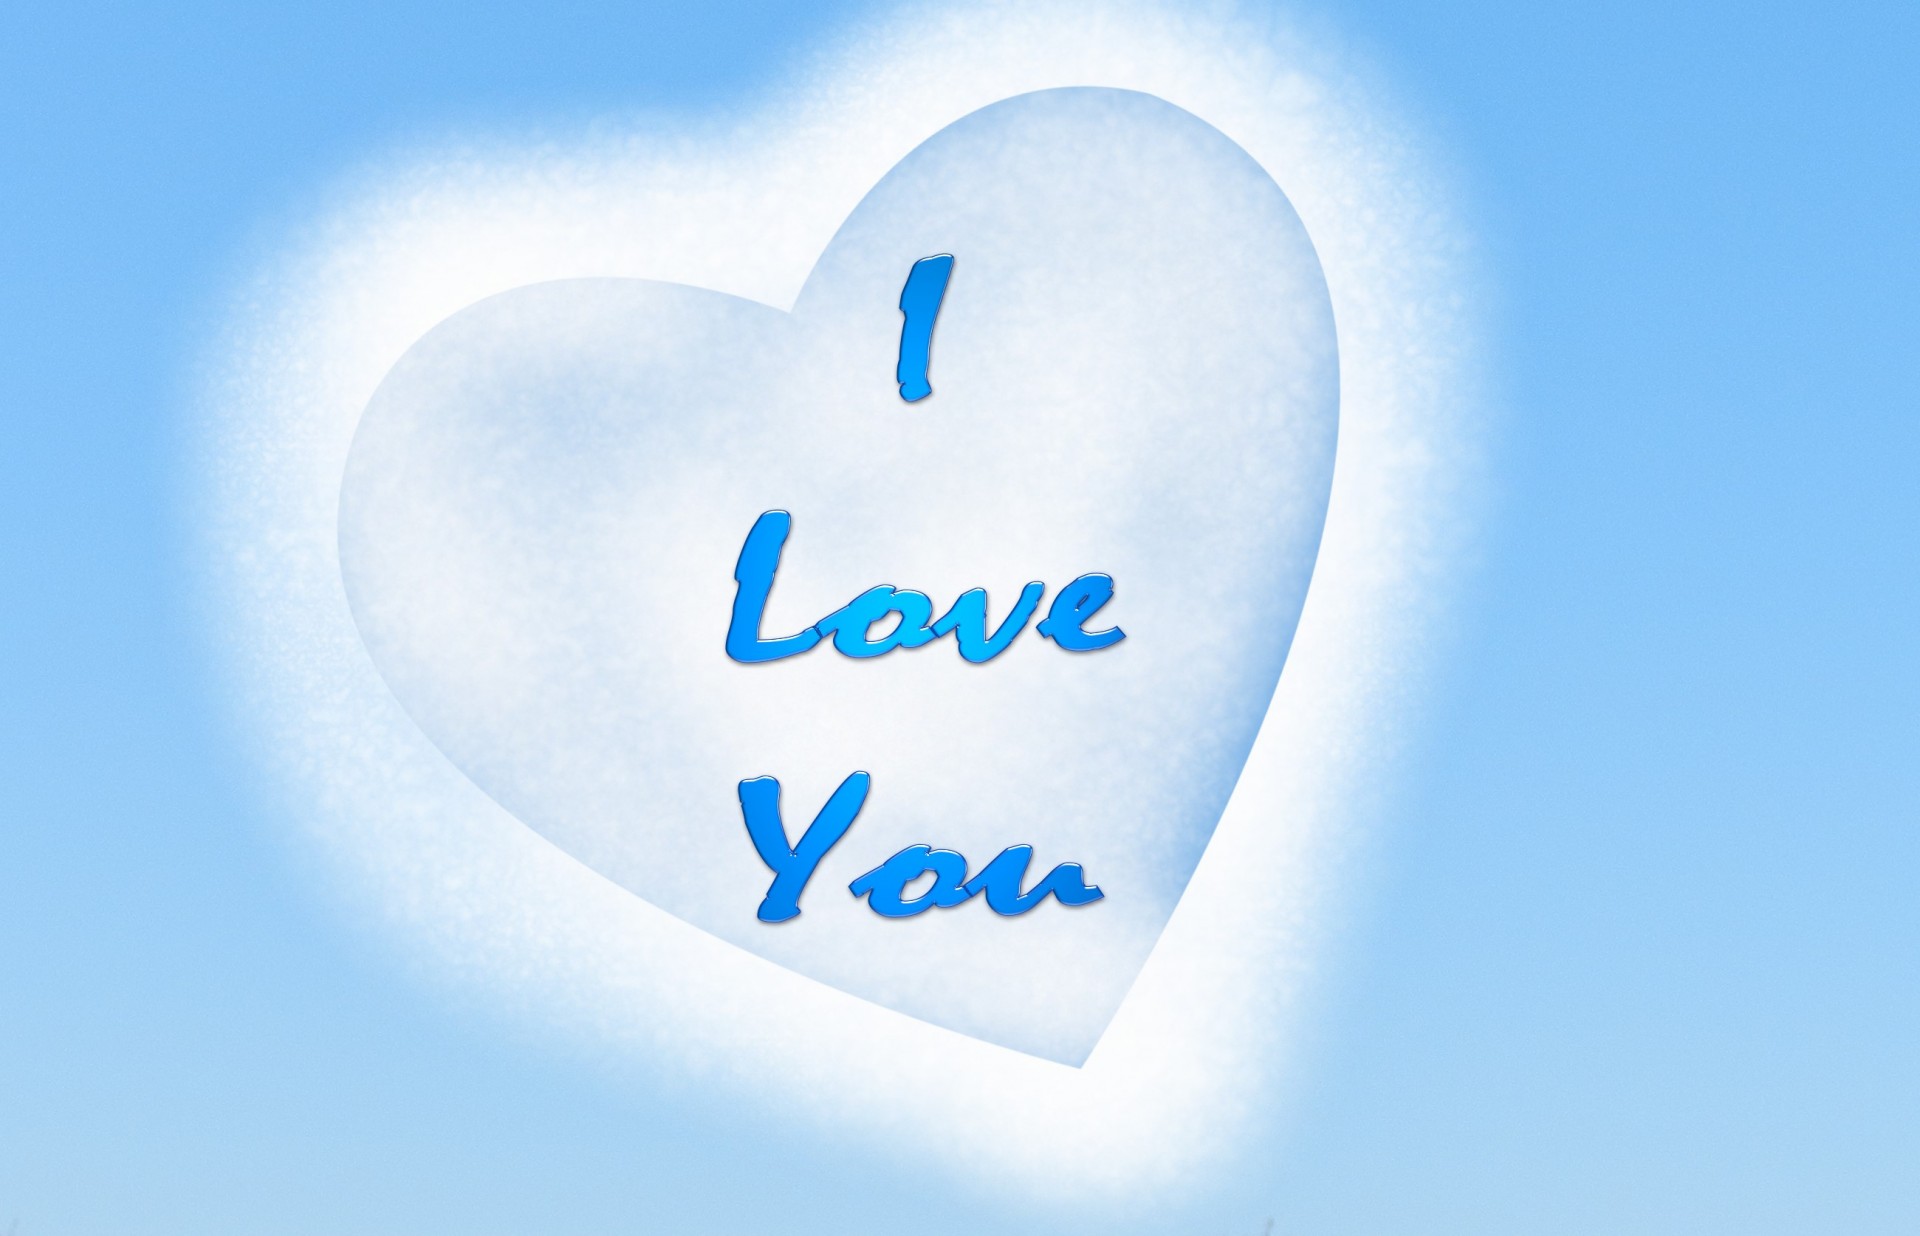 Heart,cloud,love,sky,i love you # 1 - free image from 